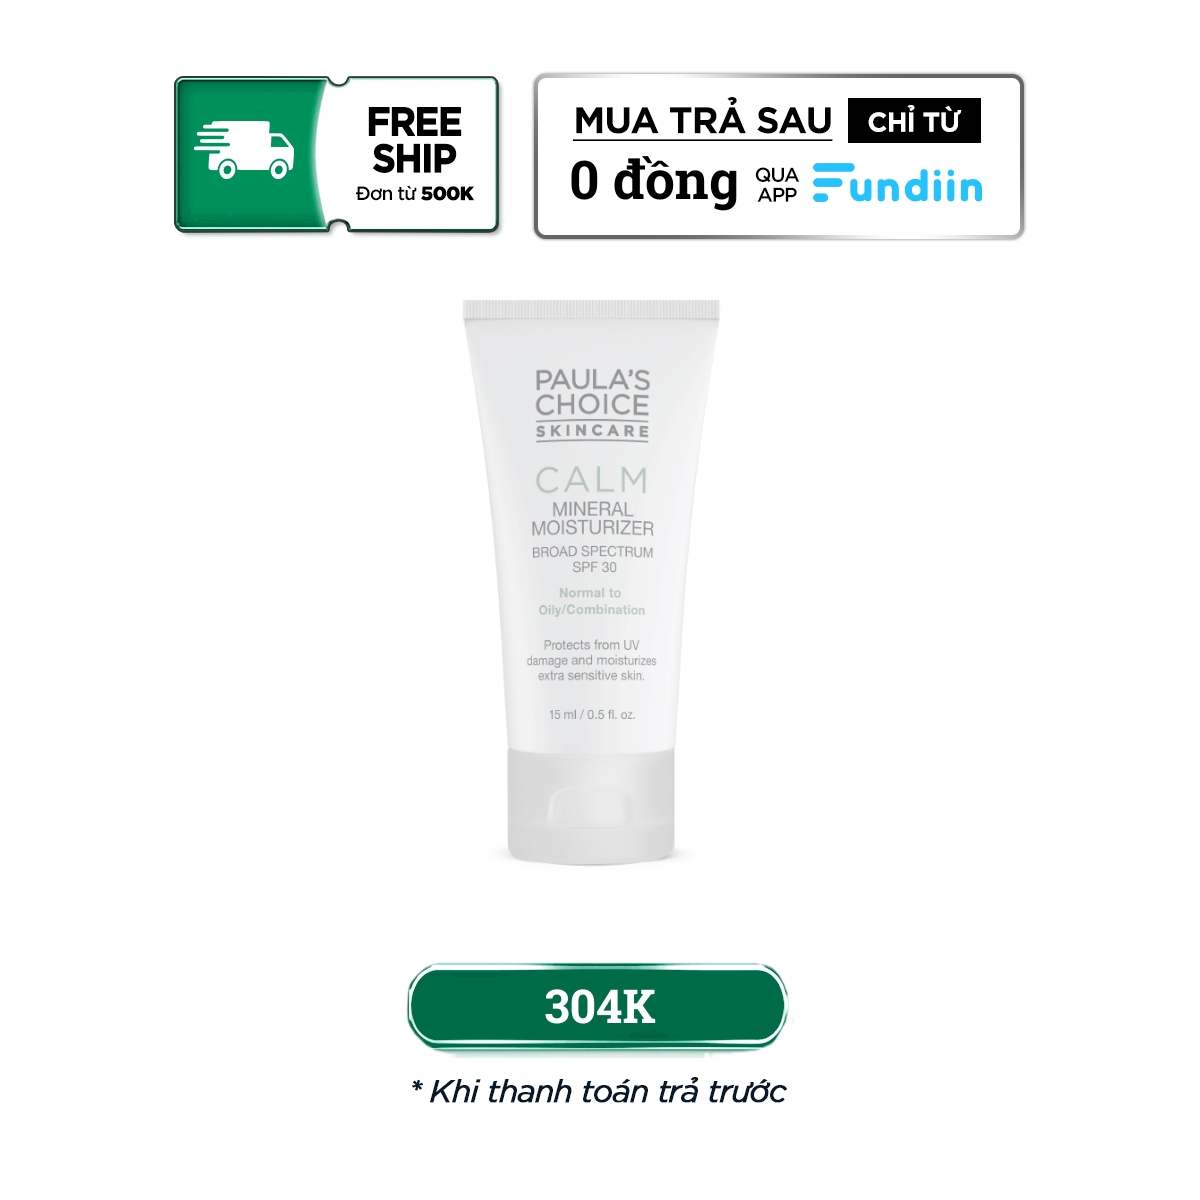 Sữa dưỡng ẩm chống nắng Paula’s Choice Calm Mineral Moisturizer SPF 30 Normal to Oily/Combination